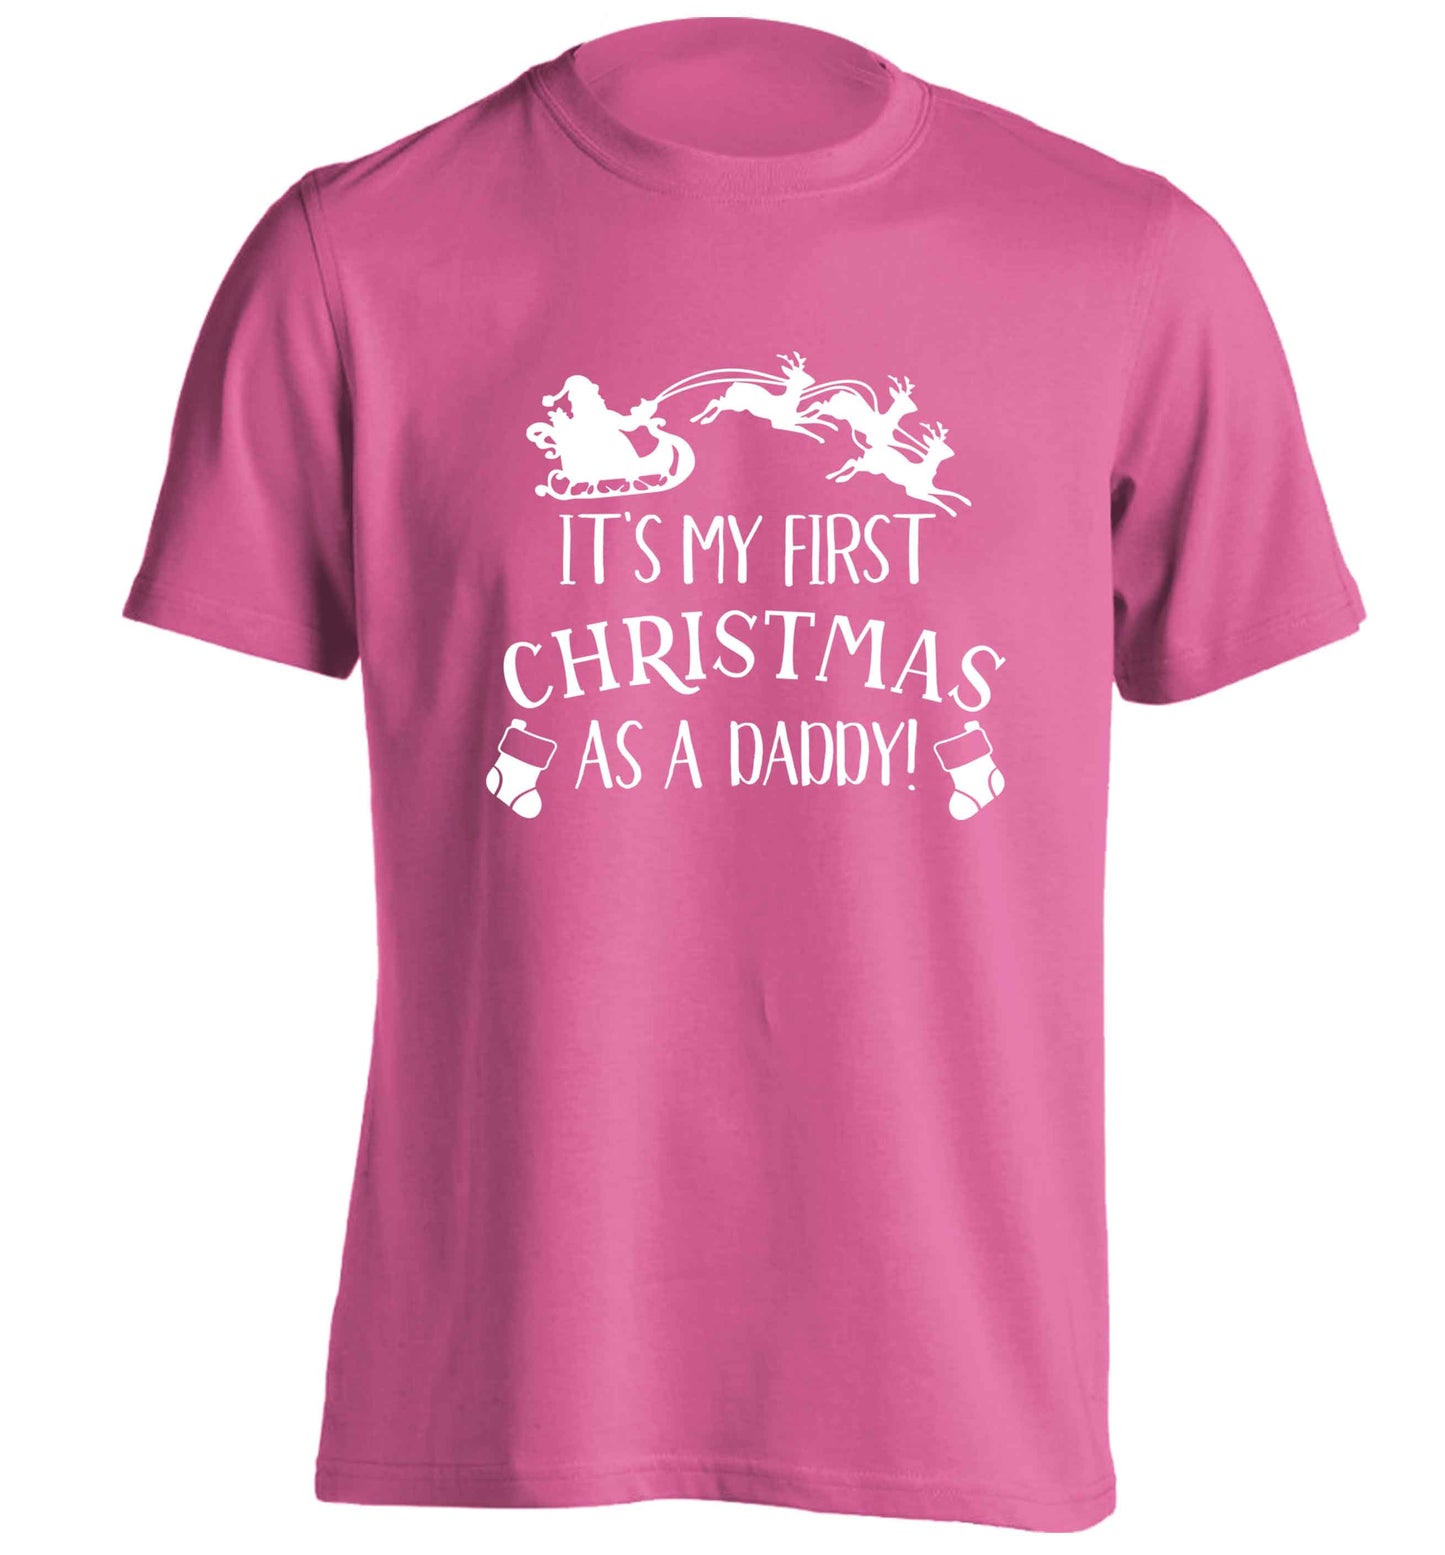 It's my first Christmas as a daddy adults unisex pink Tshirt 2XL